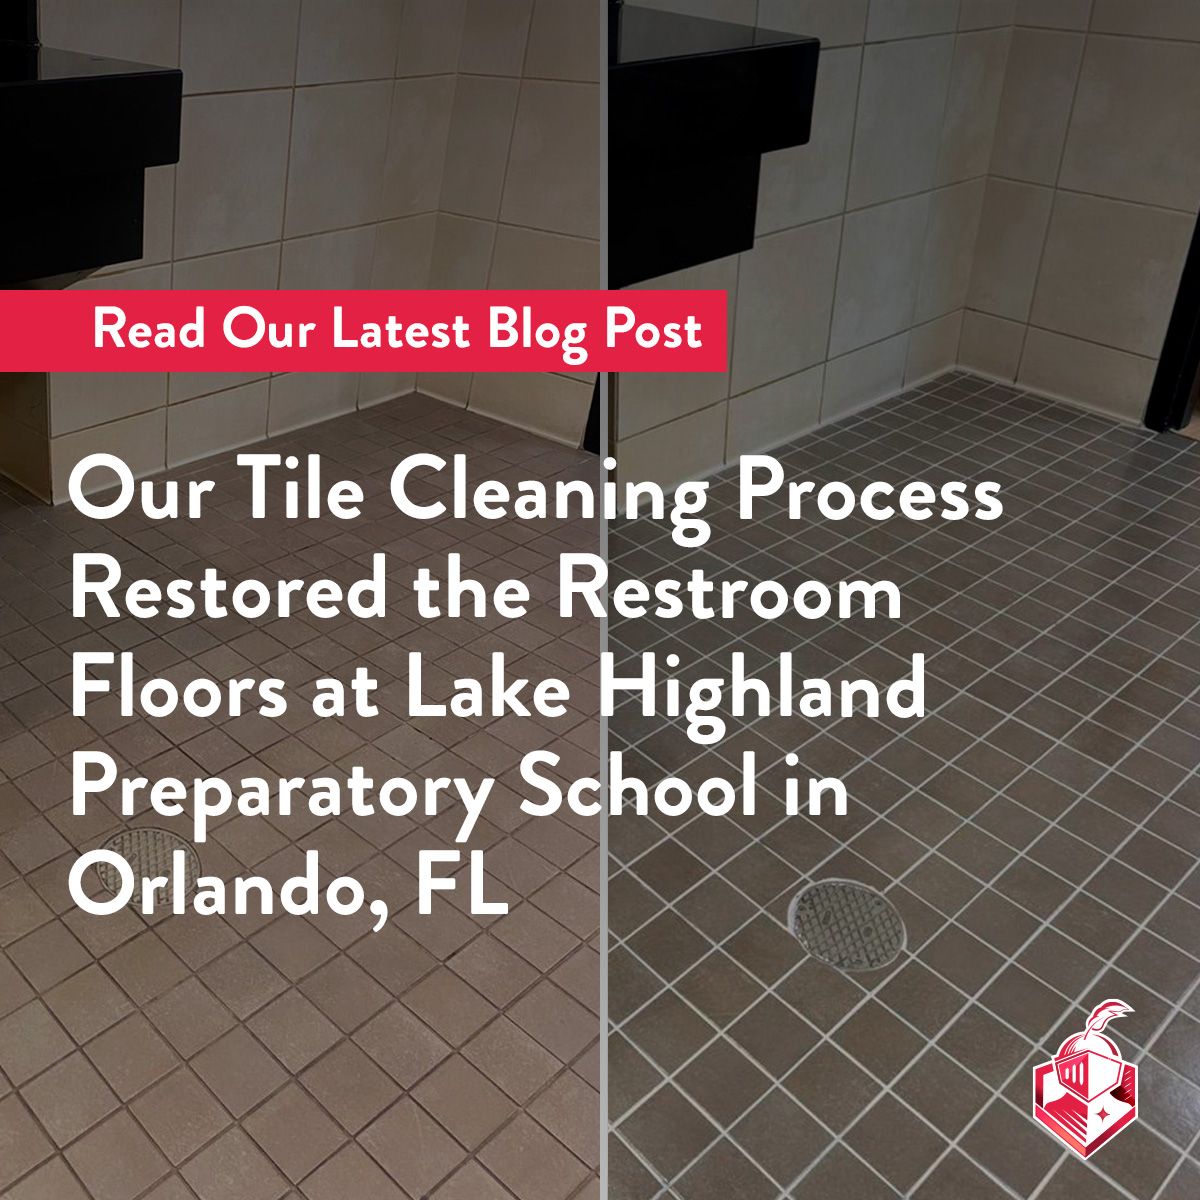 Our Tile Cleaning Process Restored the Restroom Floors at Lake Highland Preparatory School in Orlando, FL